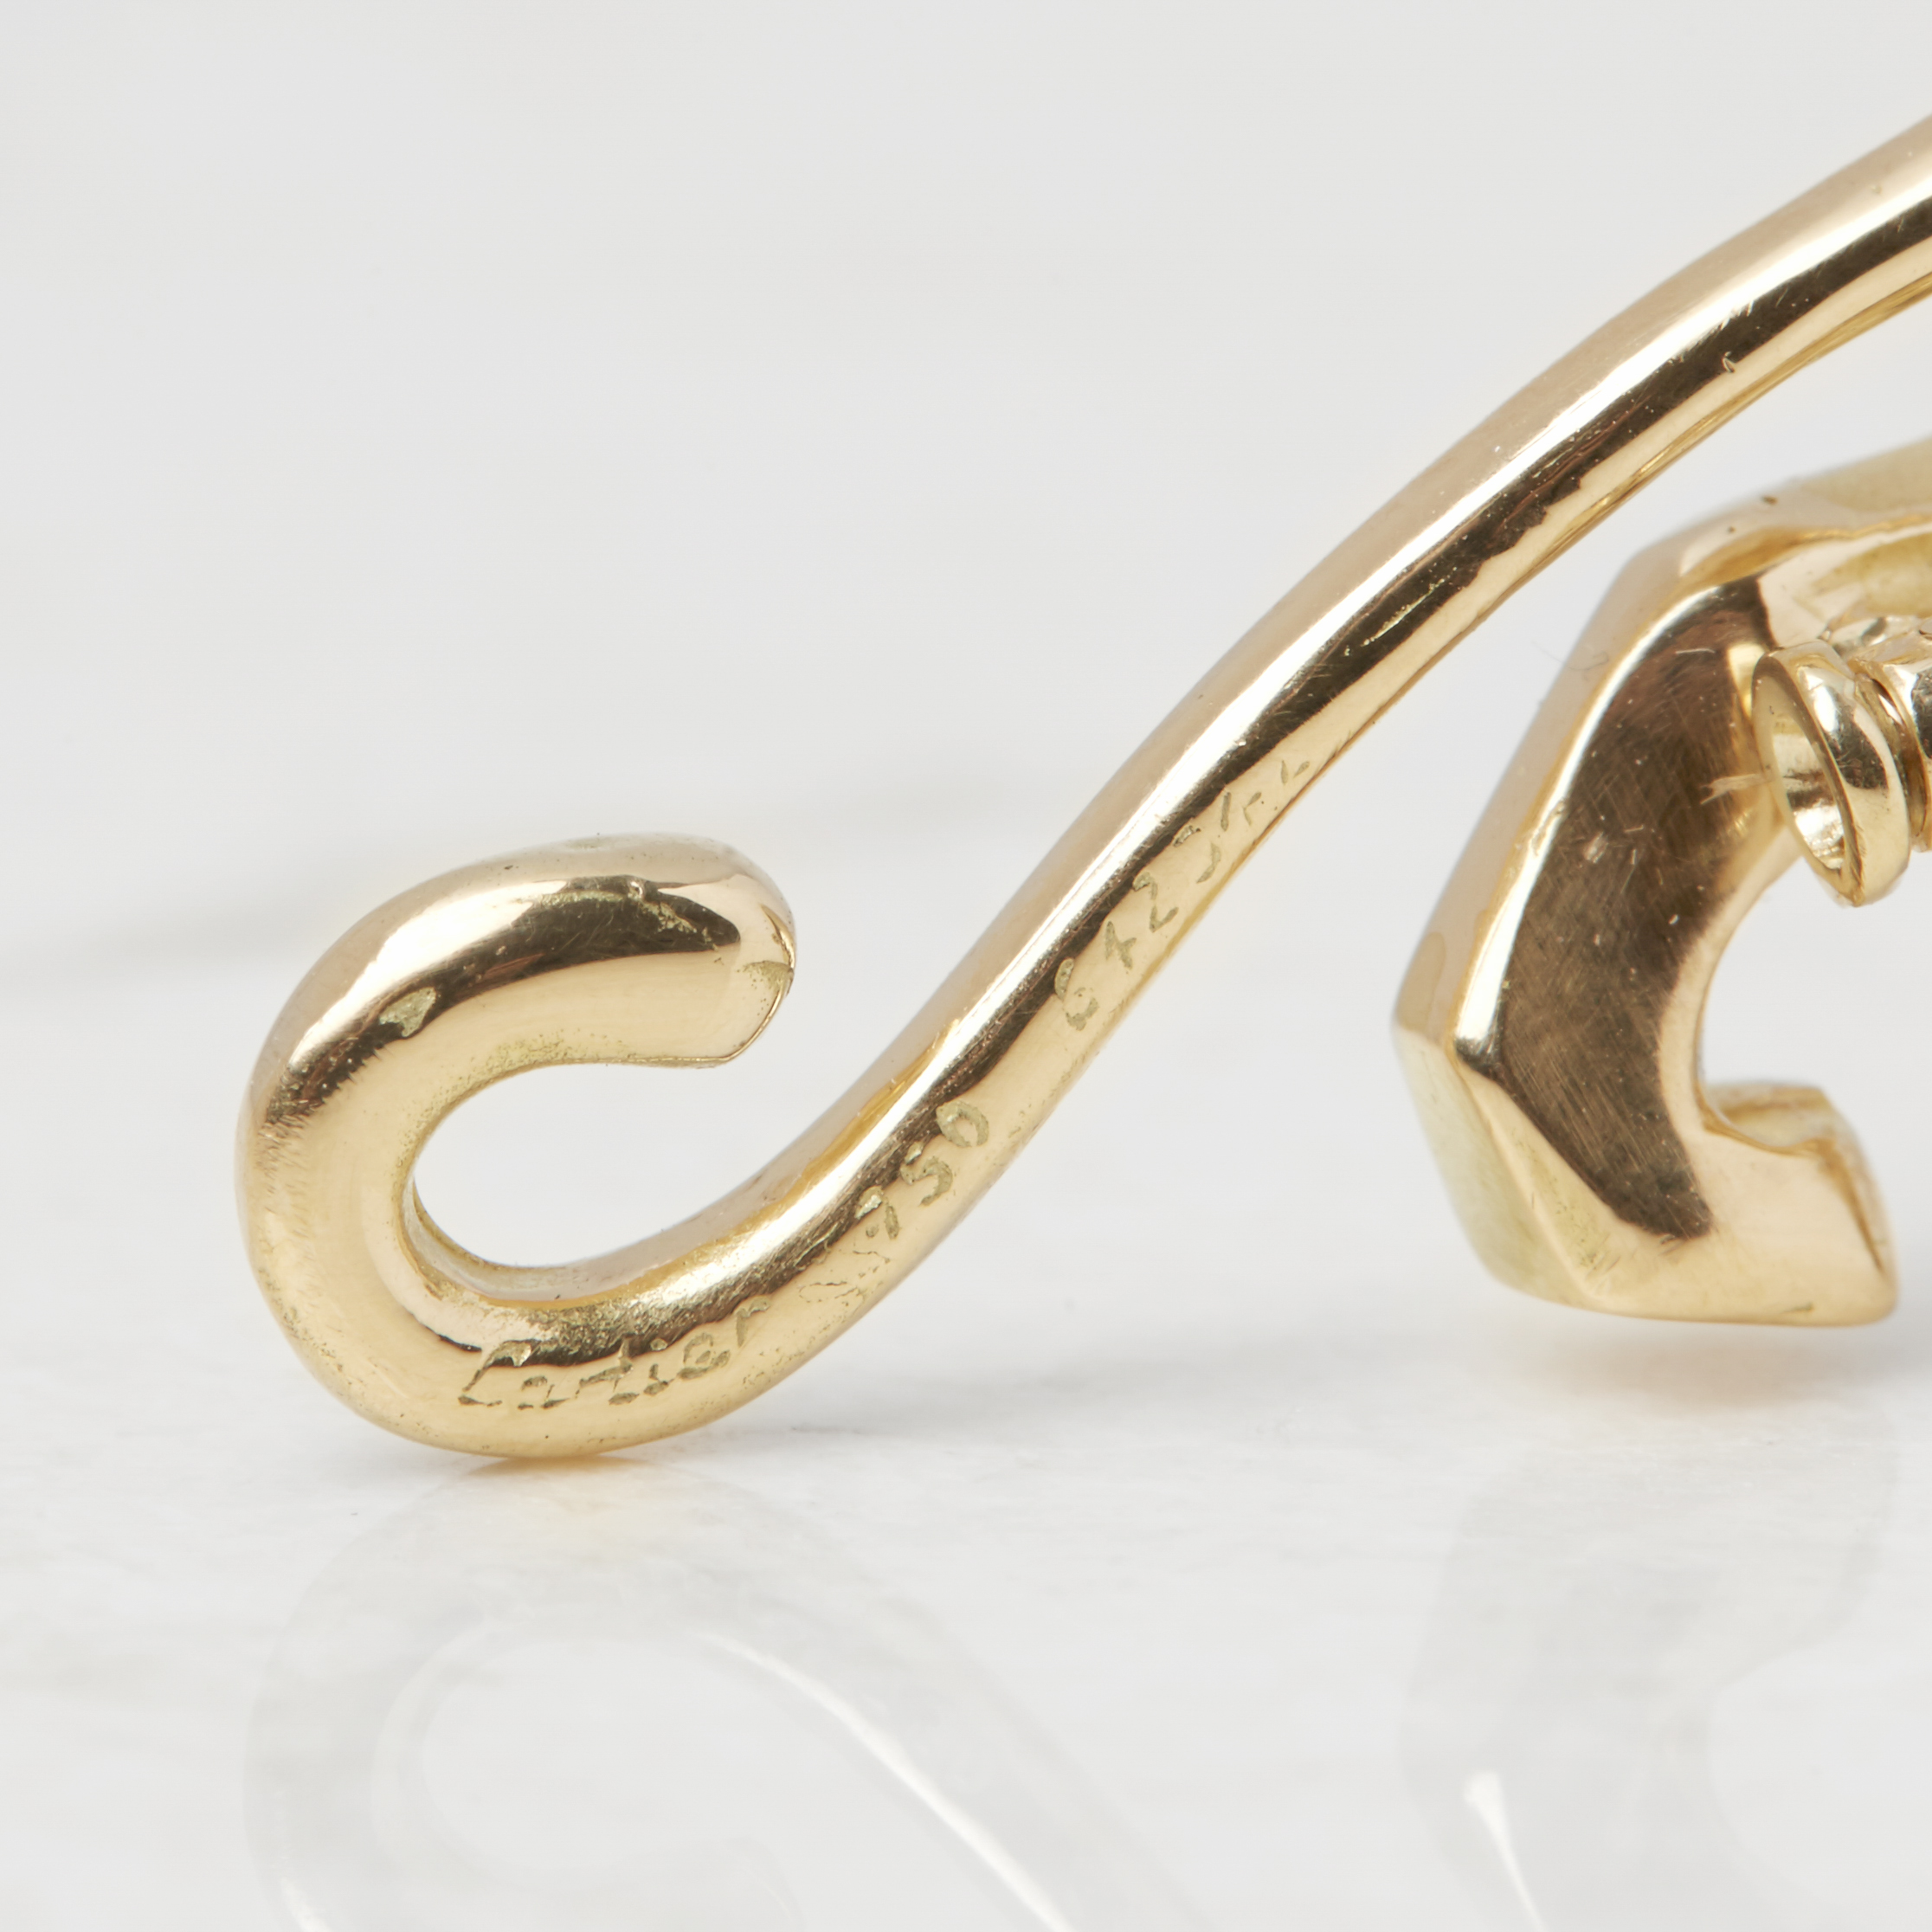 Cartier, 18k Yellow Gold Panthère Brooch - Image 7 of 9